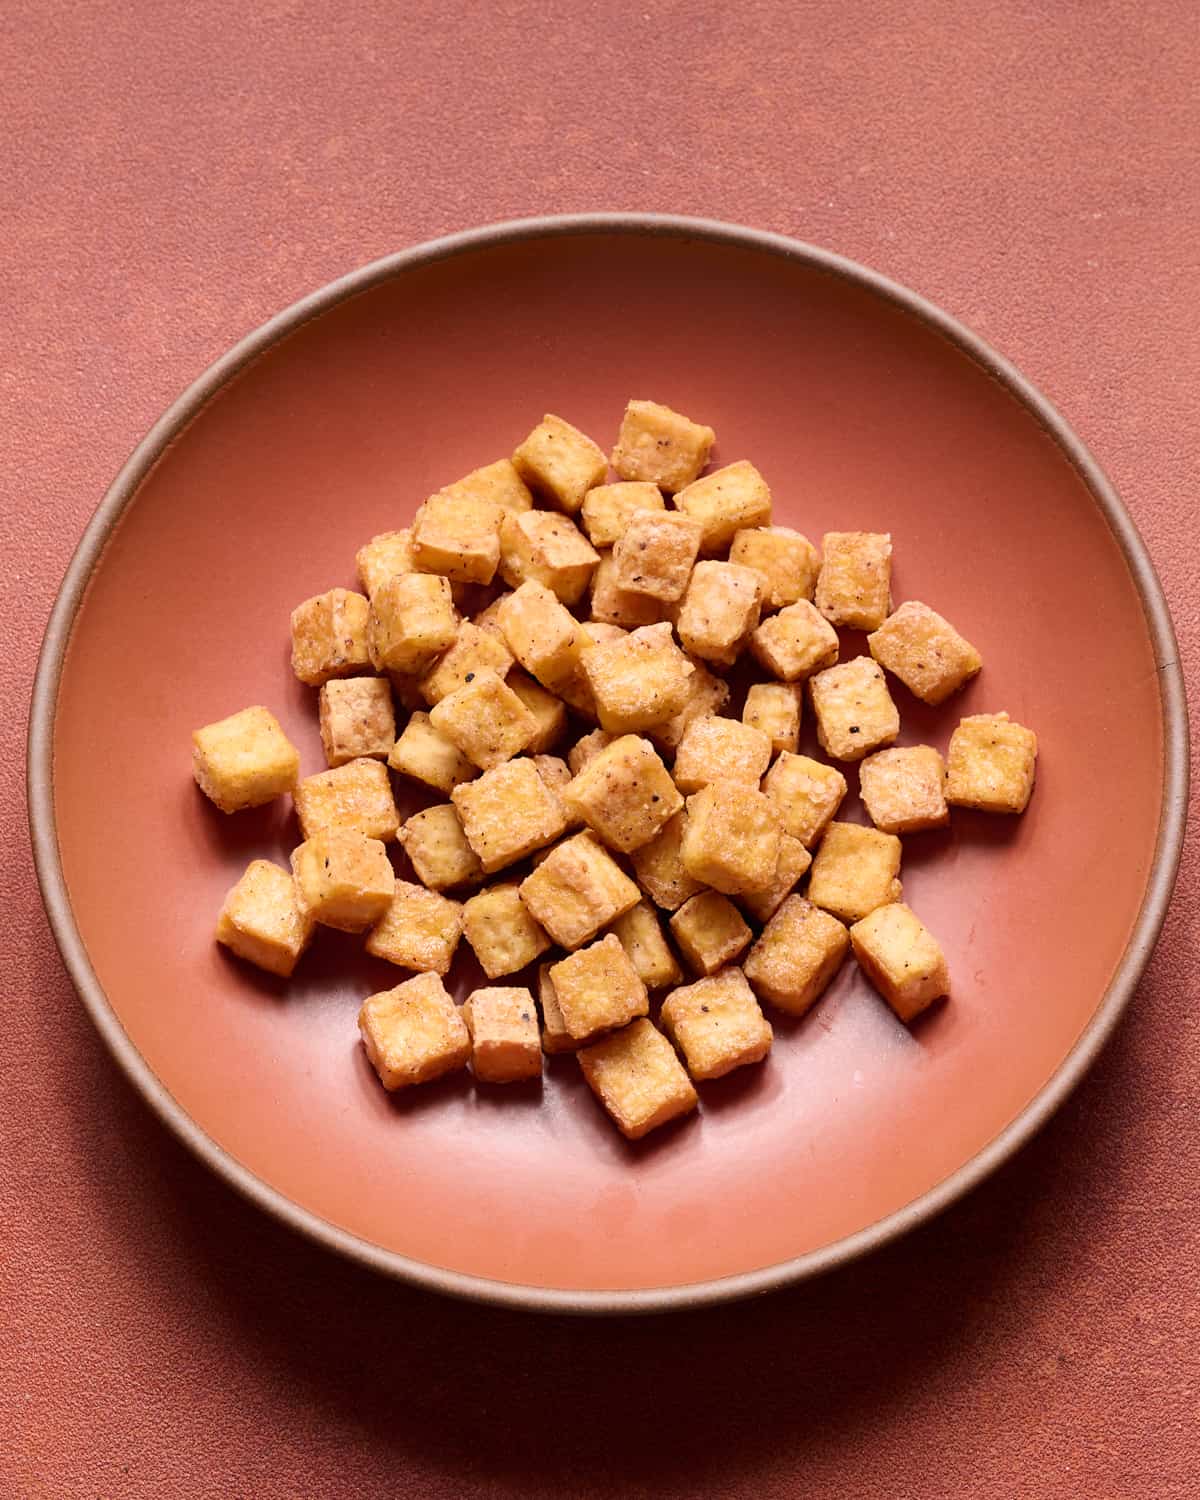 baked tofu in a bowl.